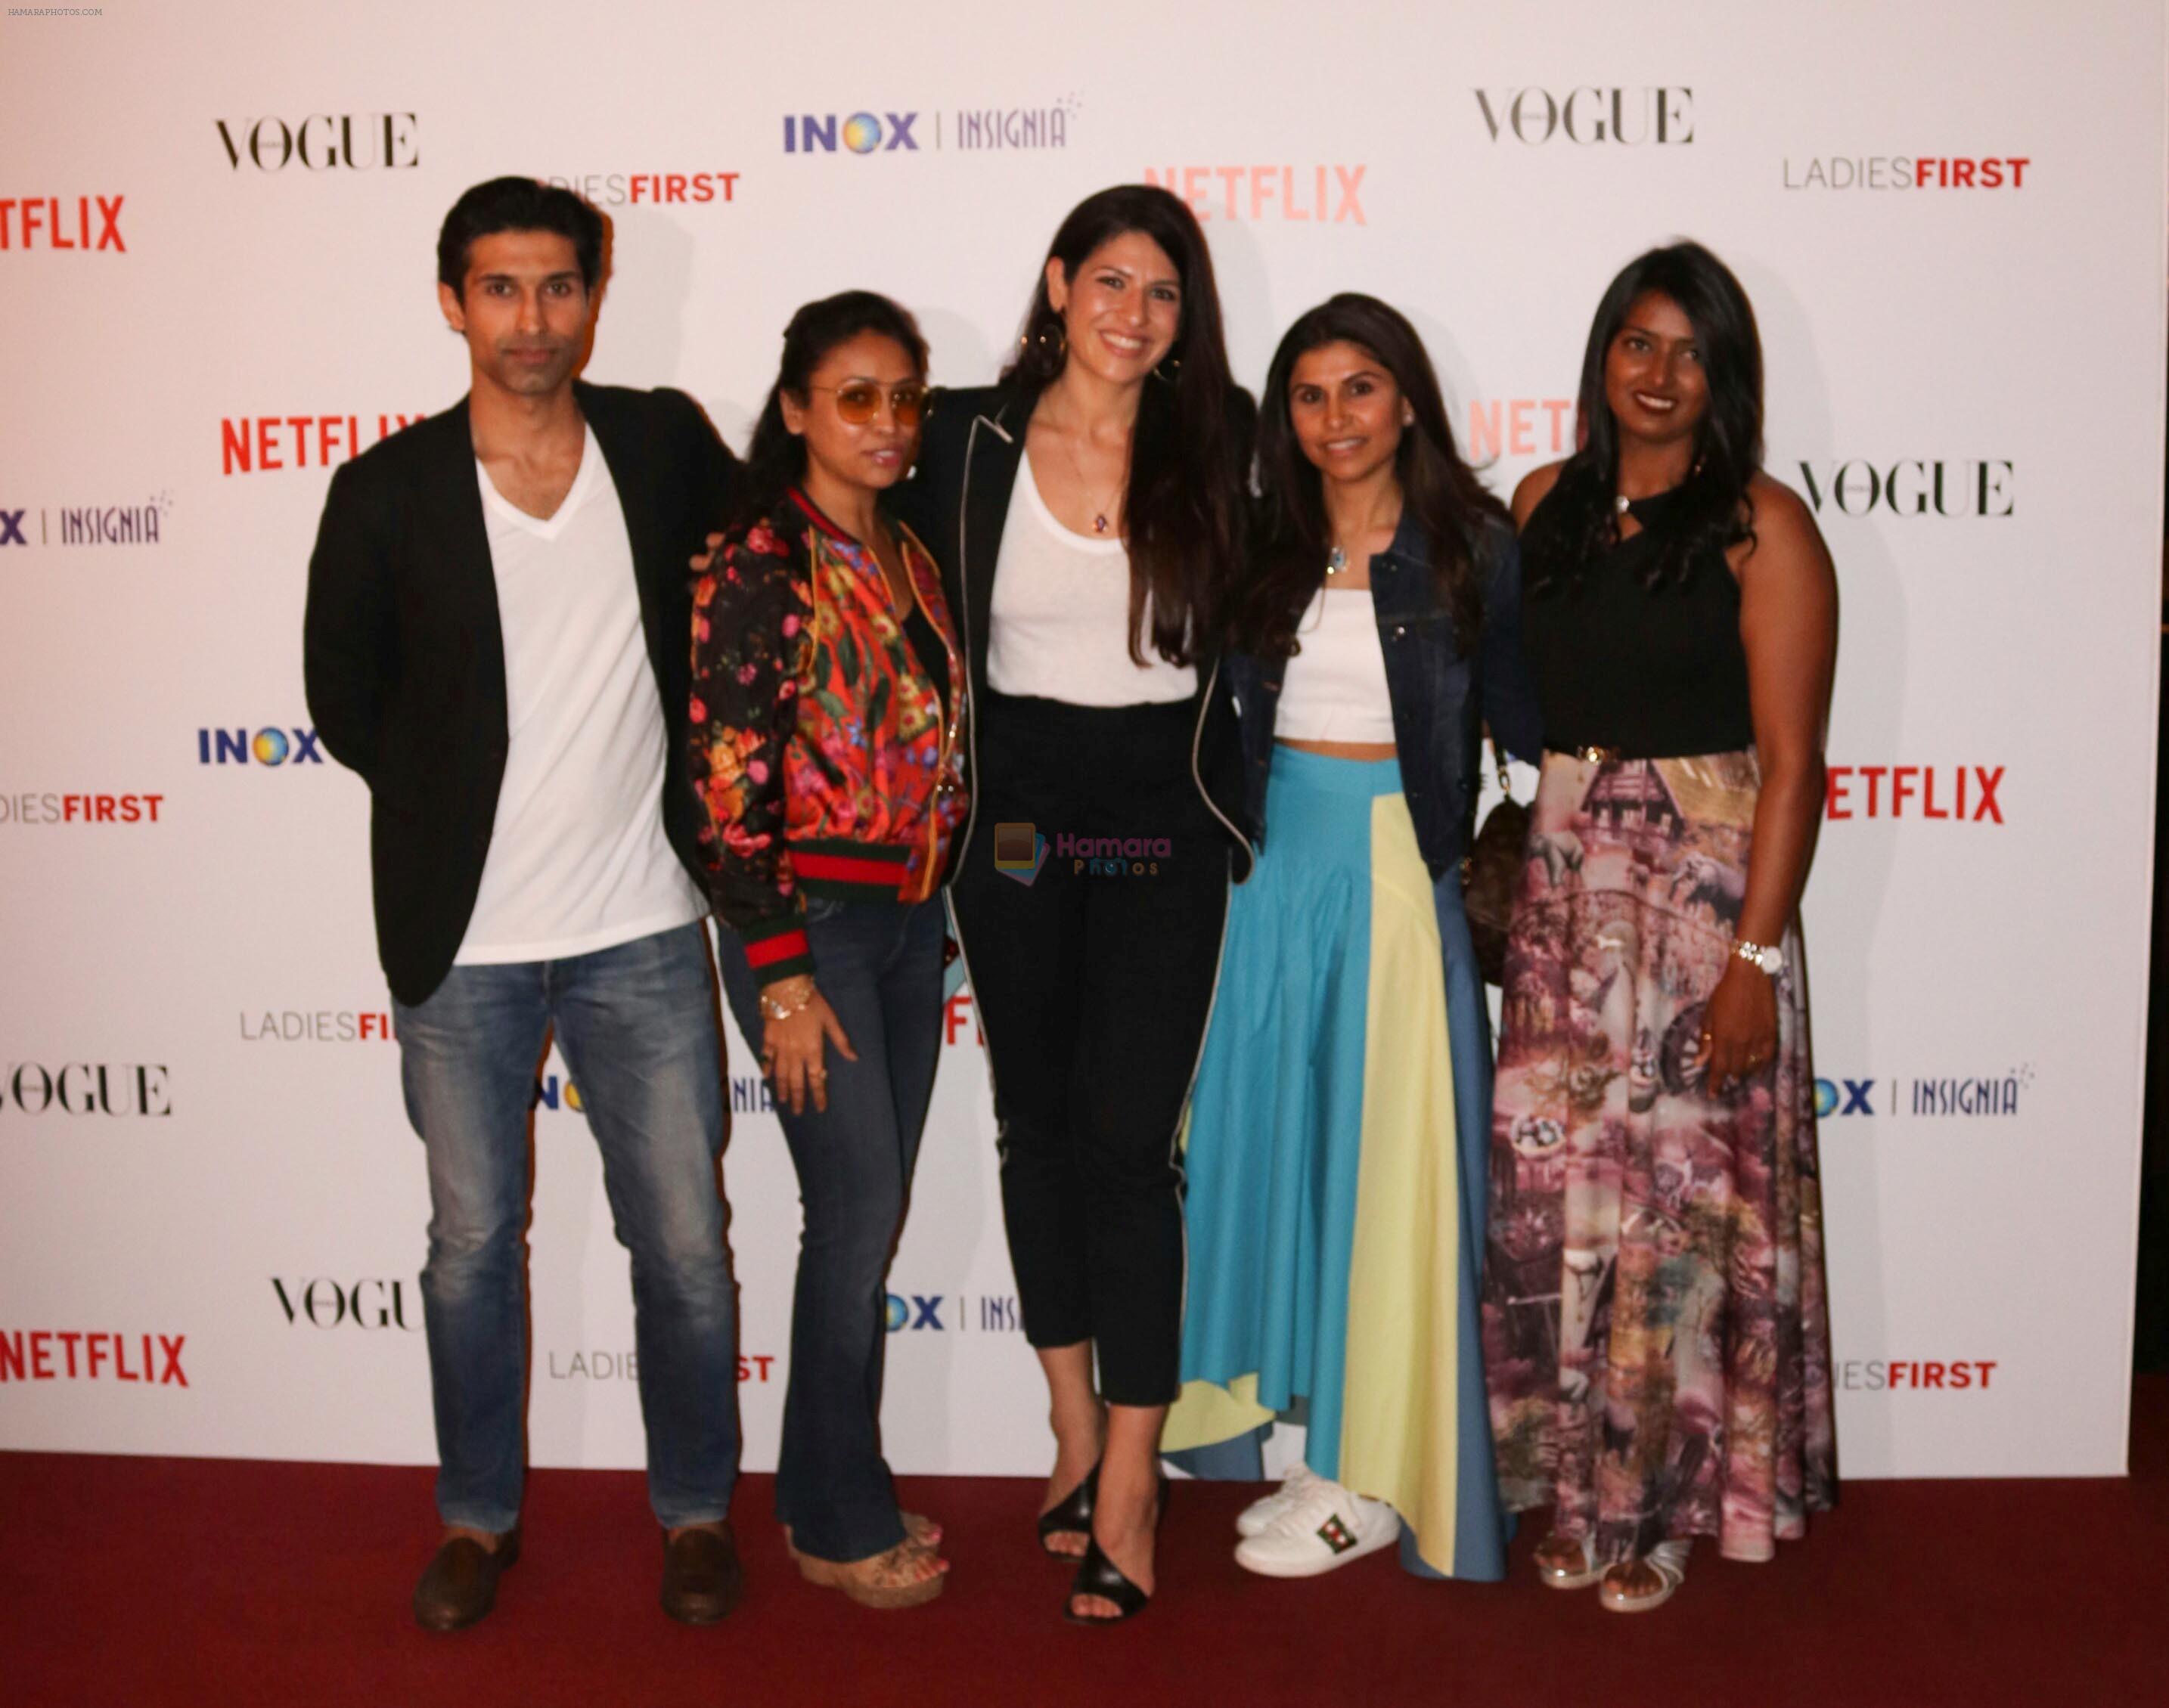 at the Premier of _Ladies First_- The First Original Netflix Documentary that chronicles the life of World No 1 Archer, Deepika Kumari on 8th March 2018